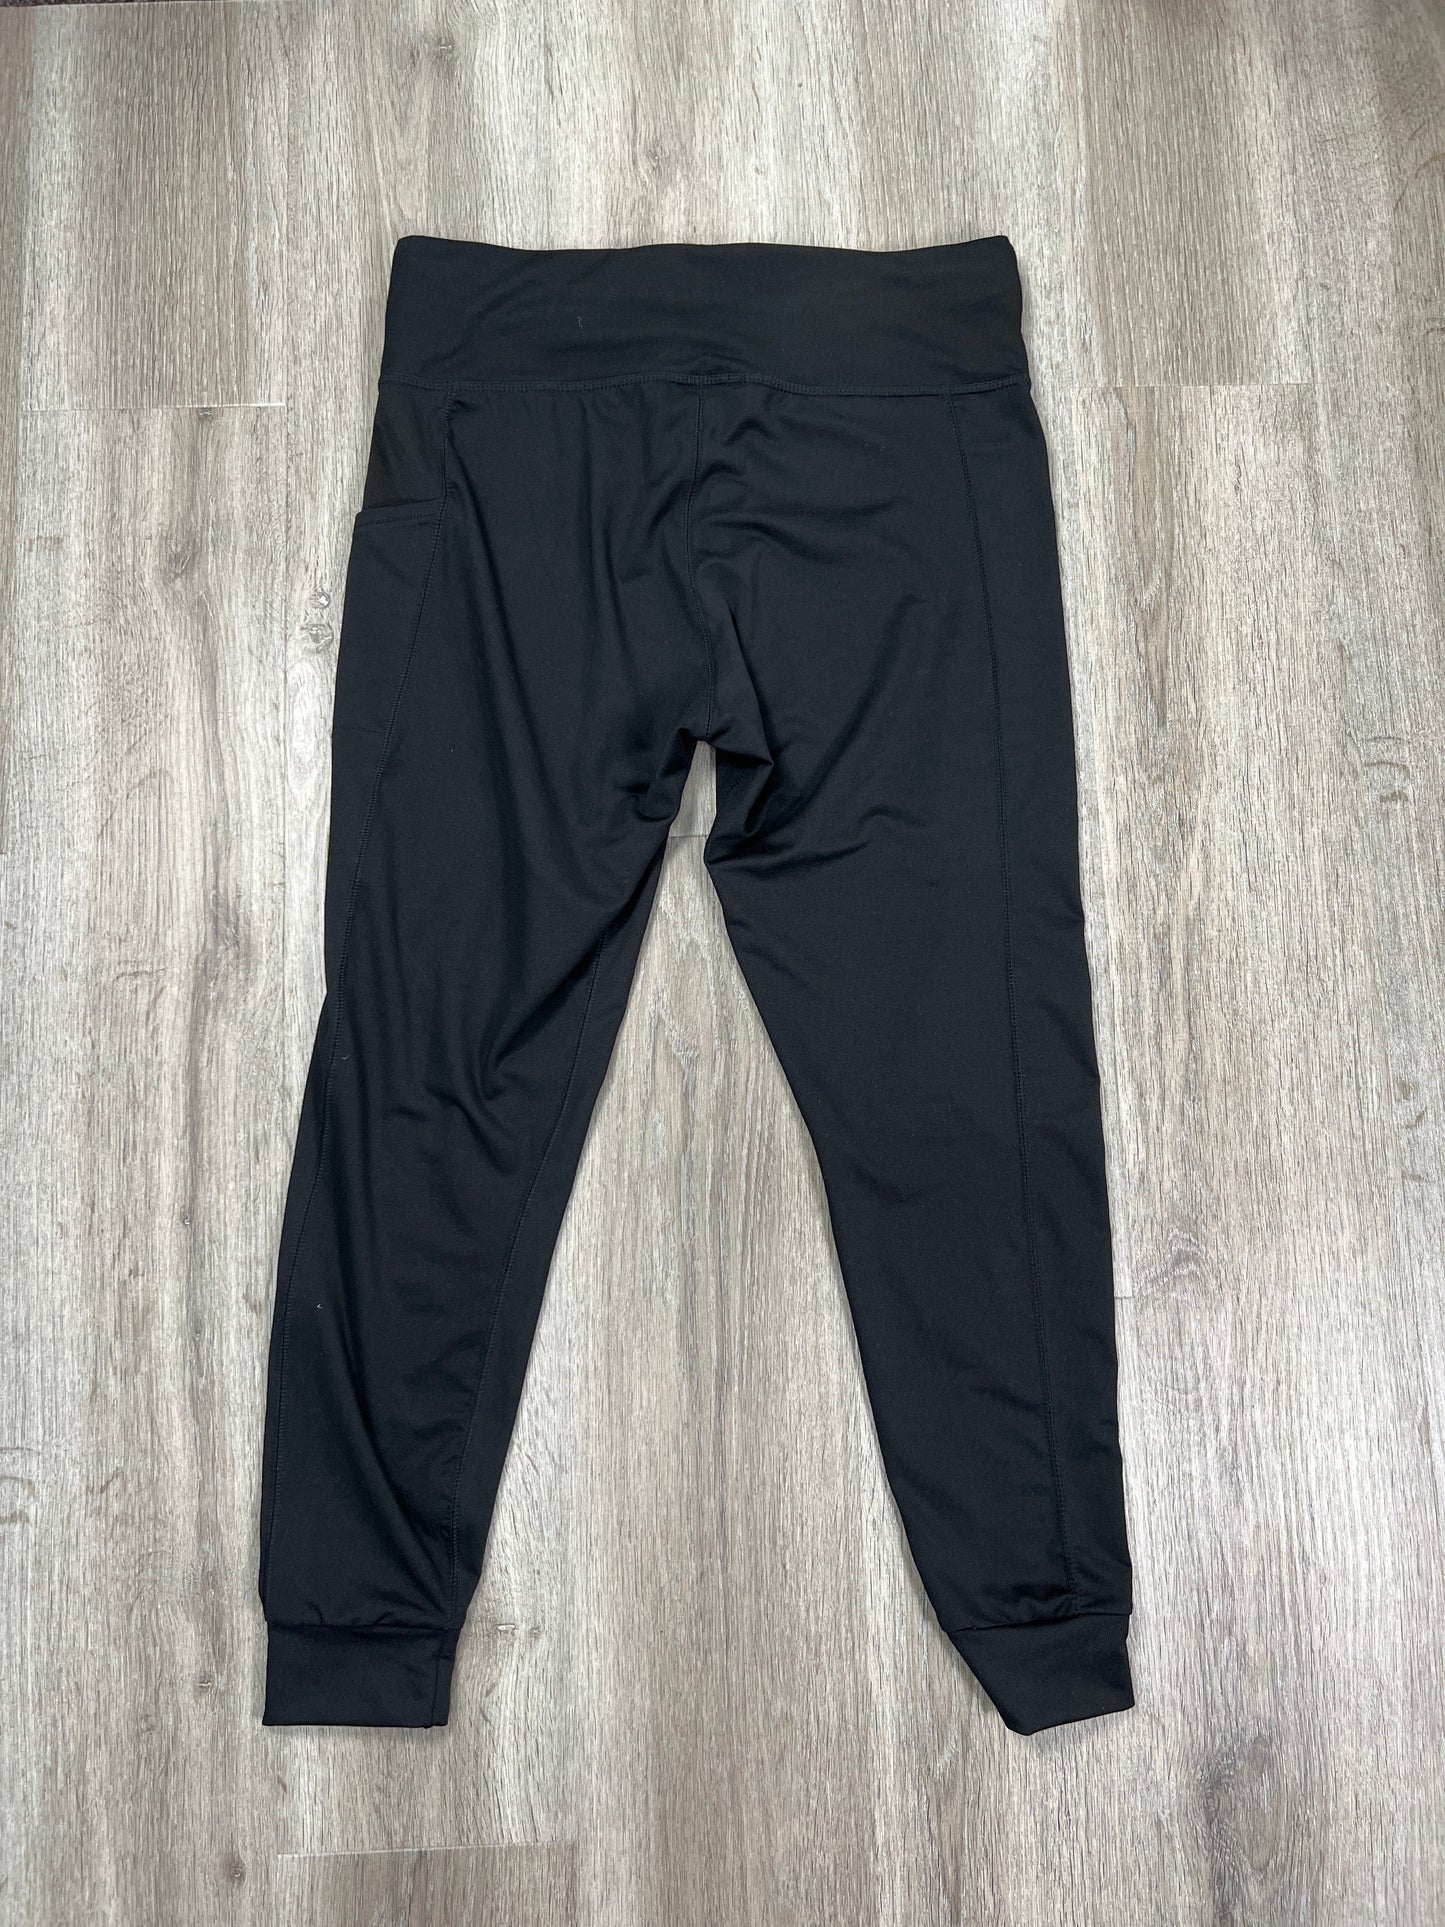 Athletic Pants By Puma  Size: Xl